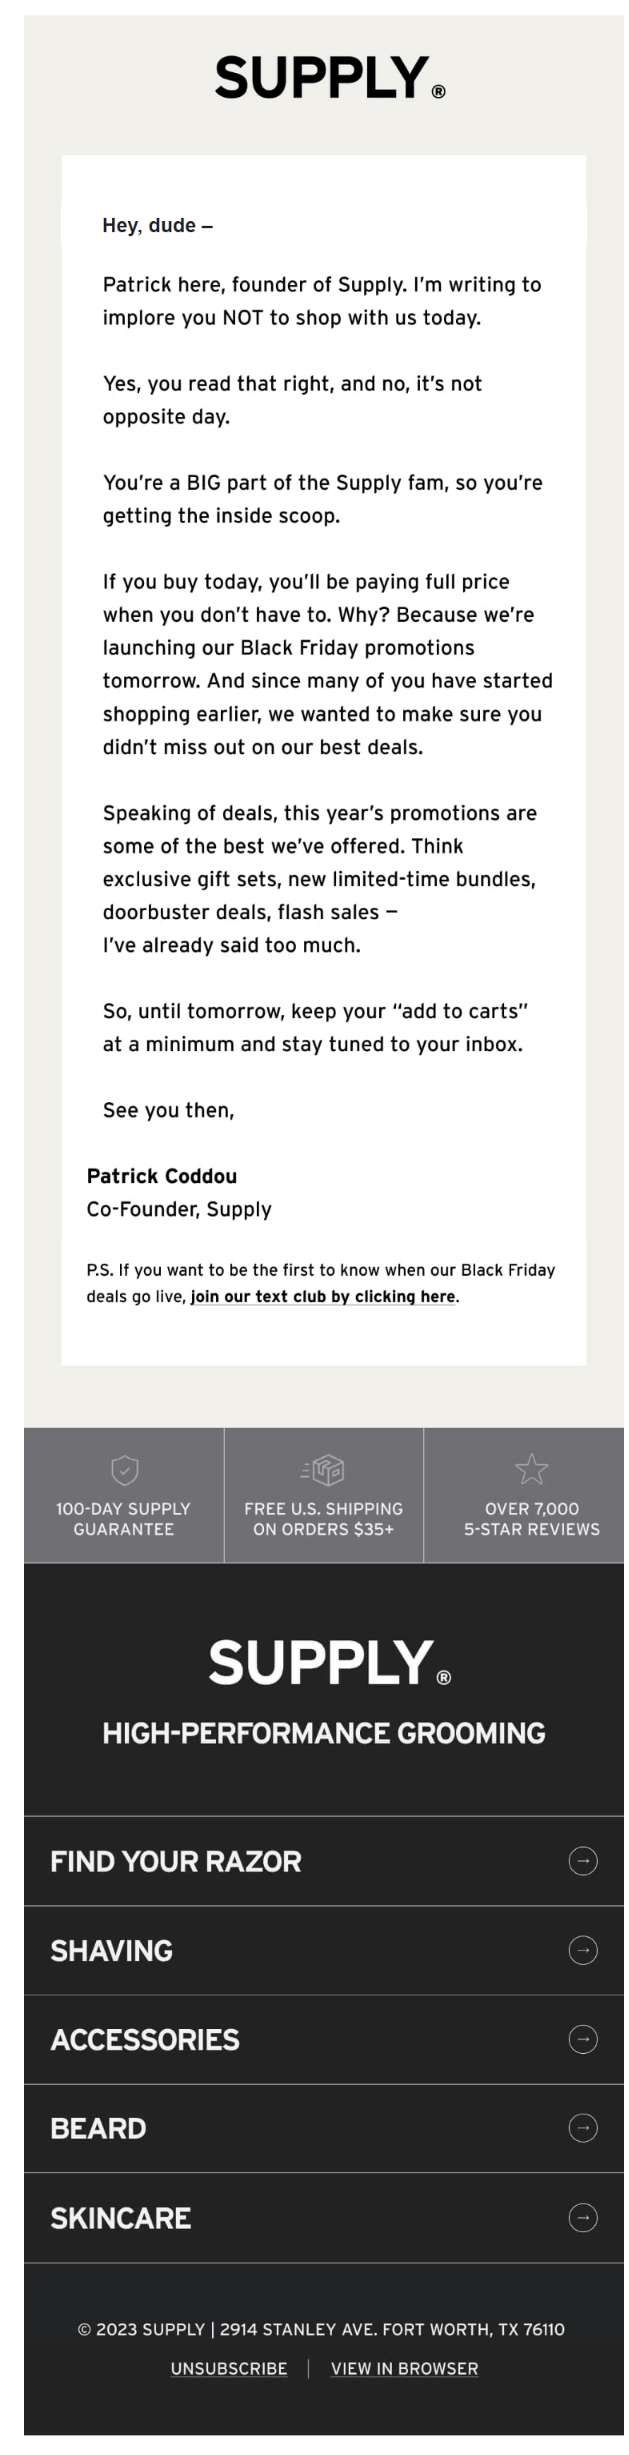 Email from Supply telling subscribers not to buy anything now because Black Friday starts tomorrow